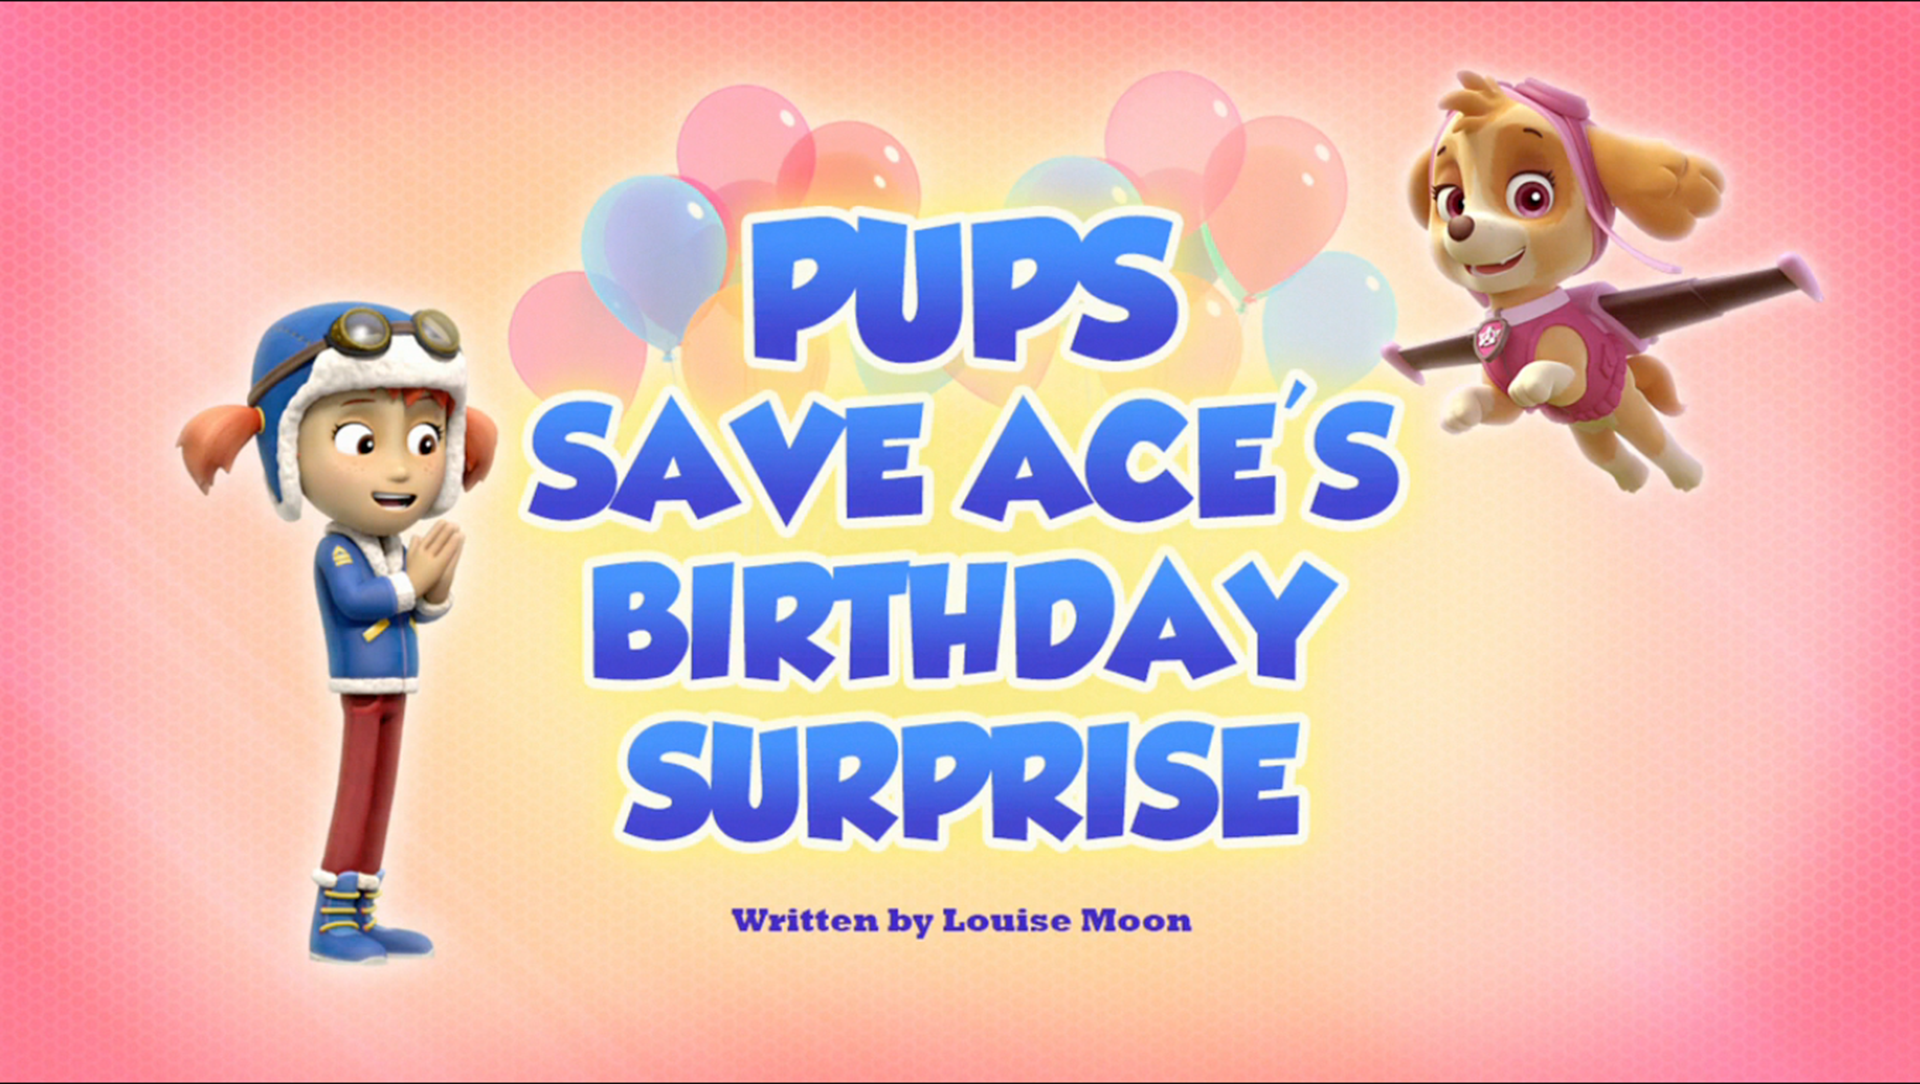 Pups Save Ace's Birthday Surprise.